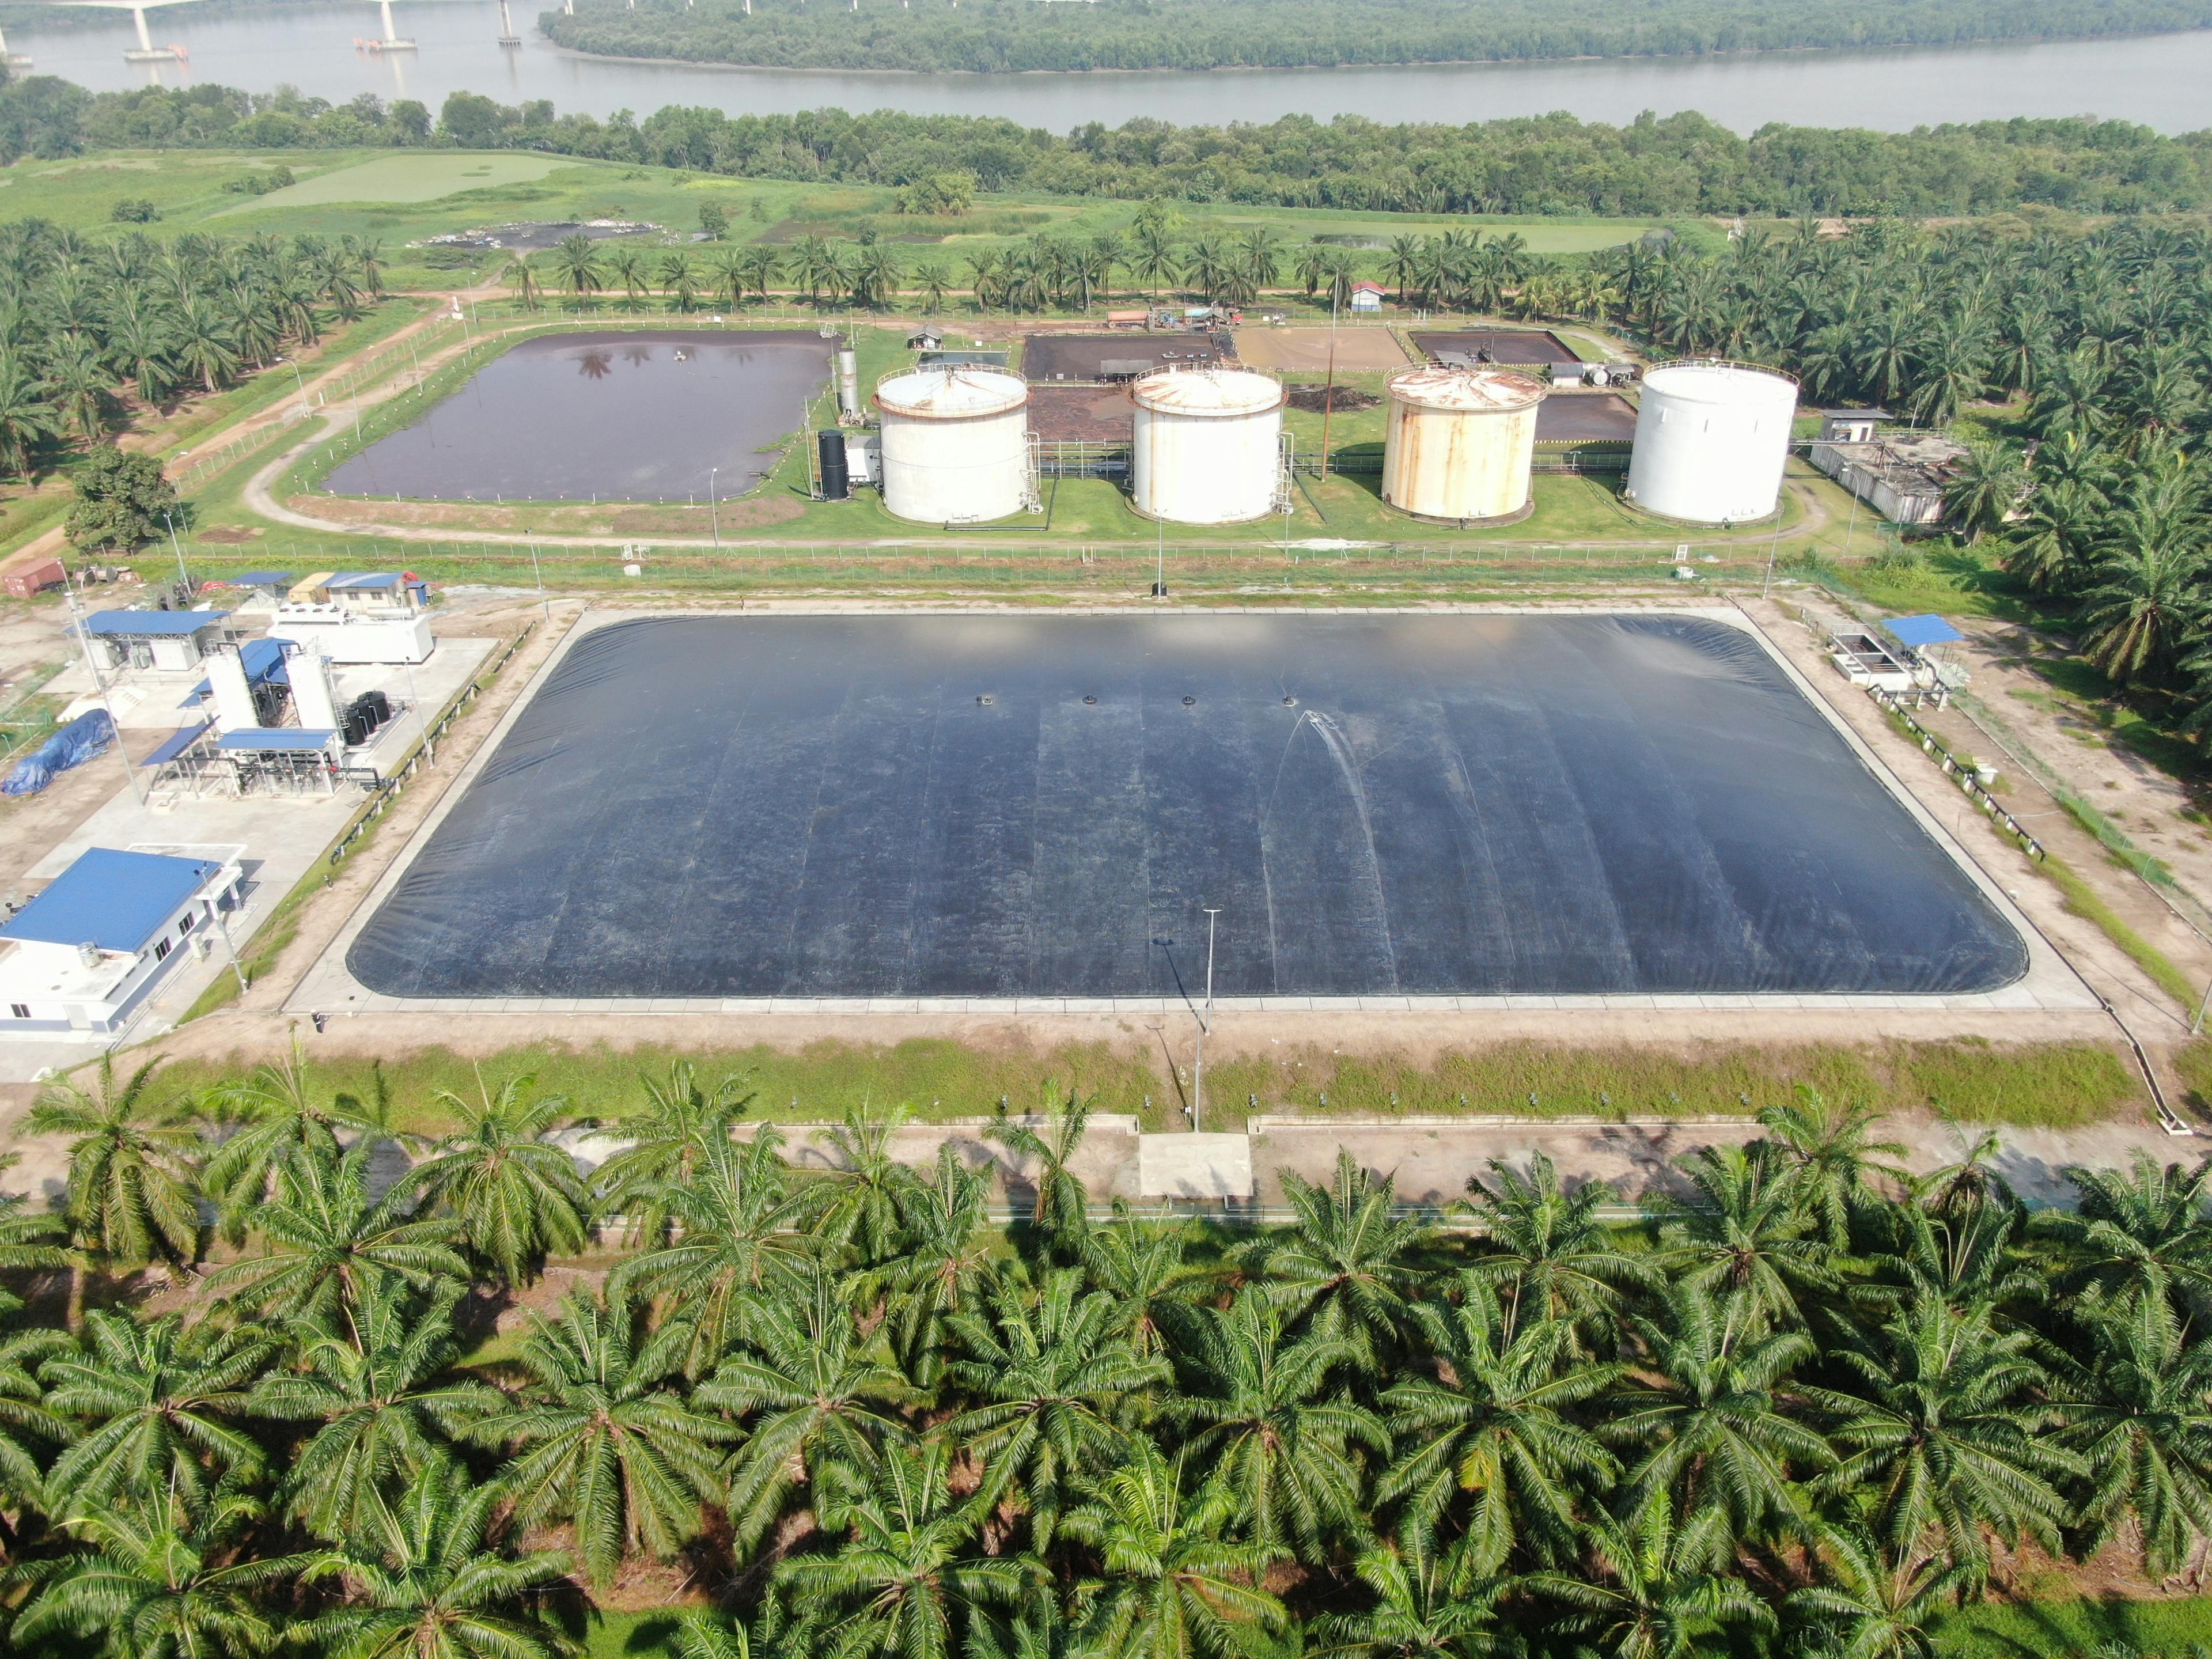 Solmax provided high-quality GSE HD Smooth geomembrane